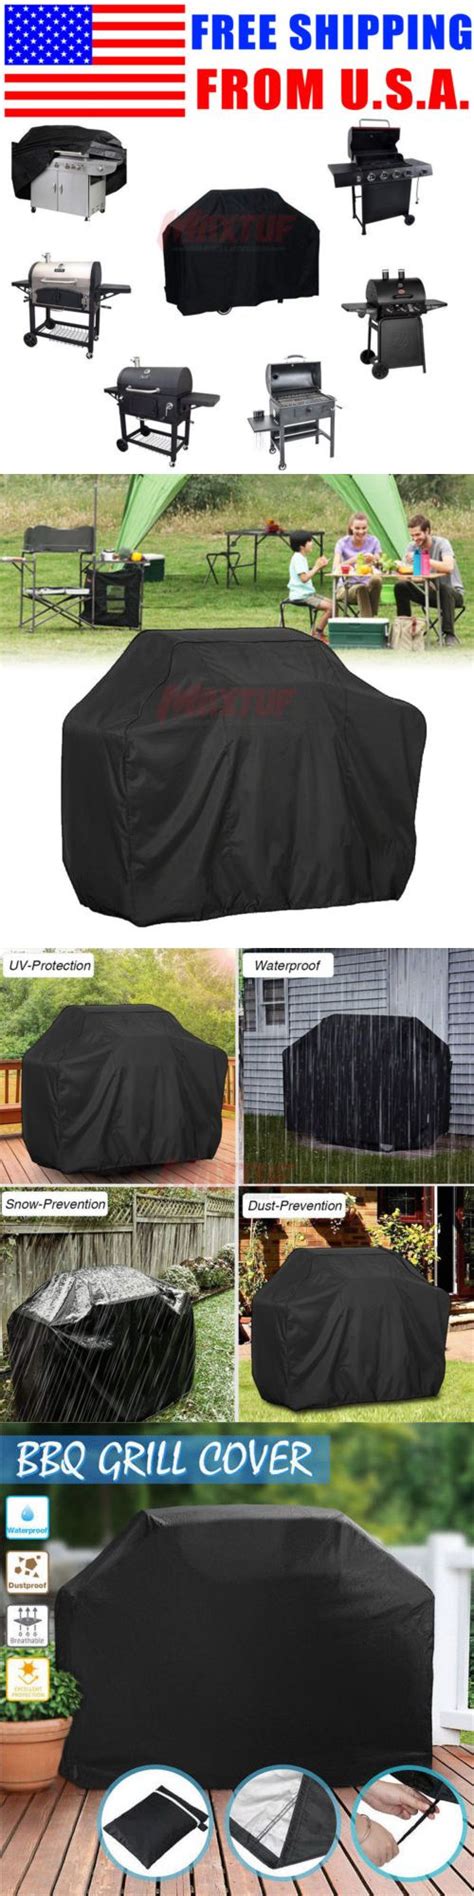 February 8, 2011 bbqgrillcovers leave a comment. Barbecue and Grill Covers 79686: 32-Inch Gas Grill Cover ...